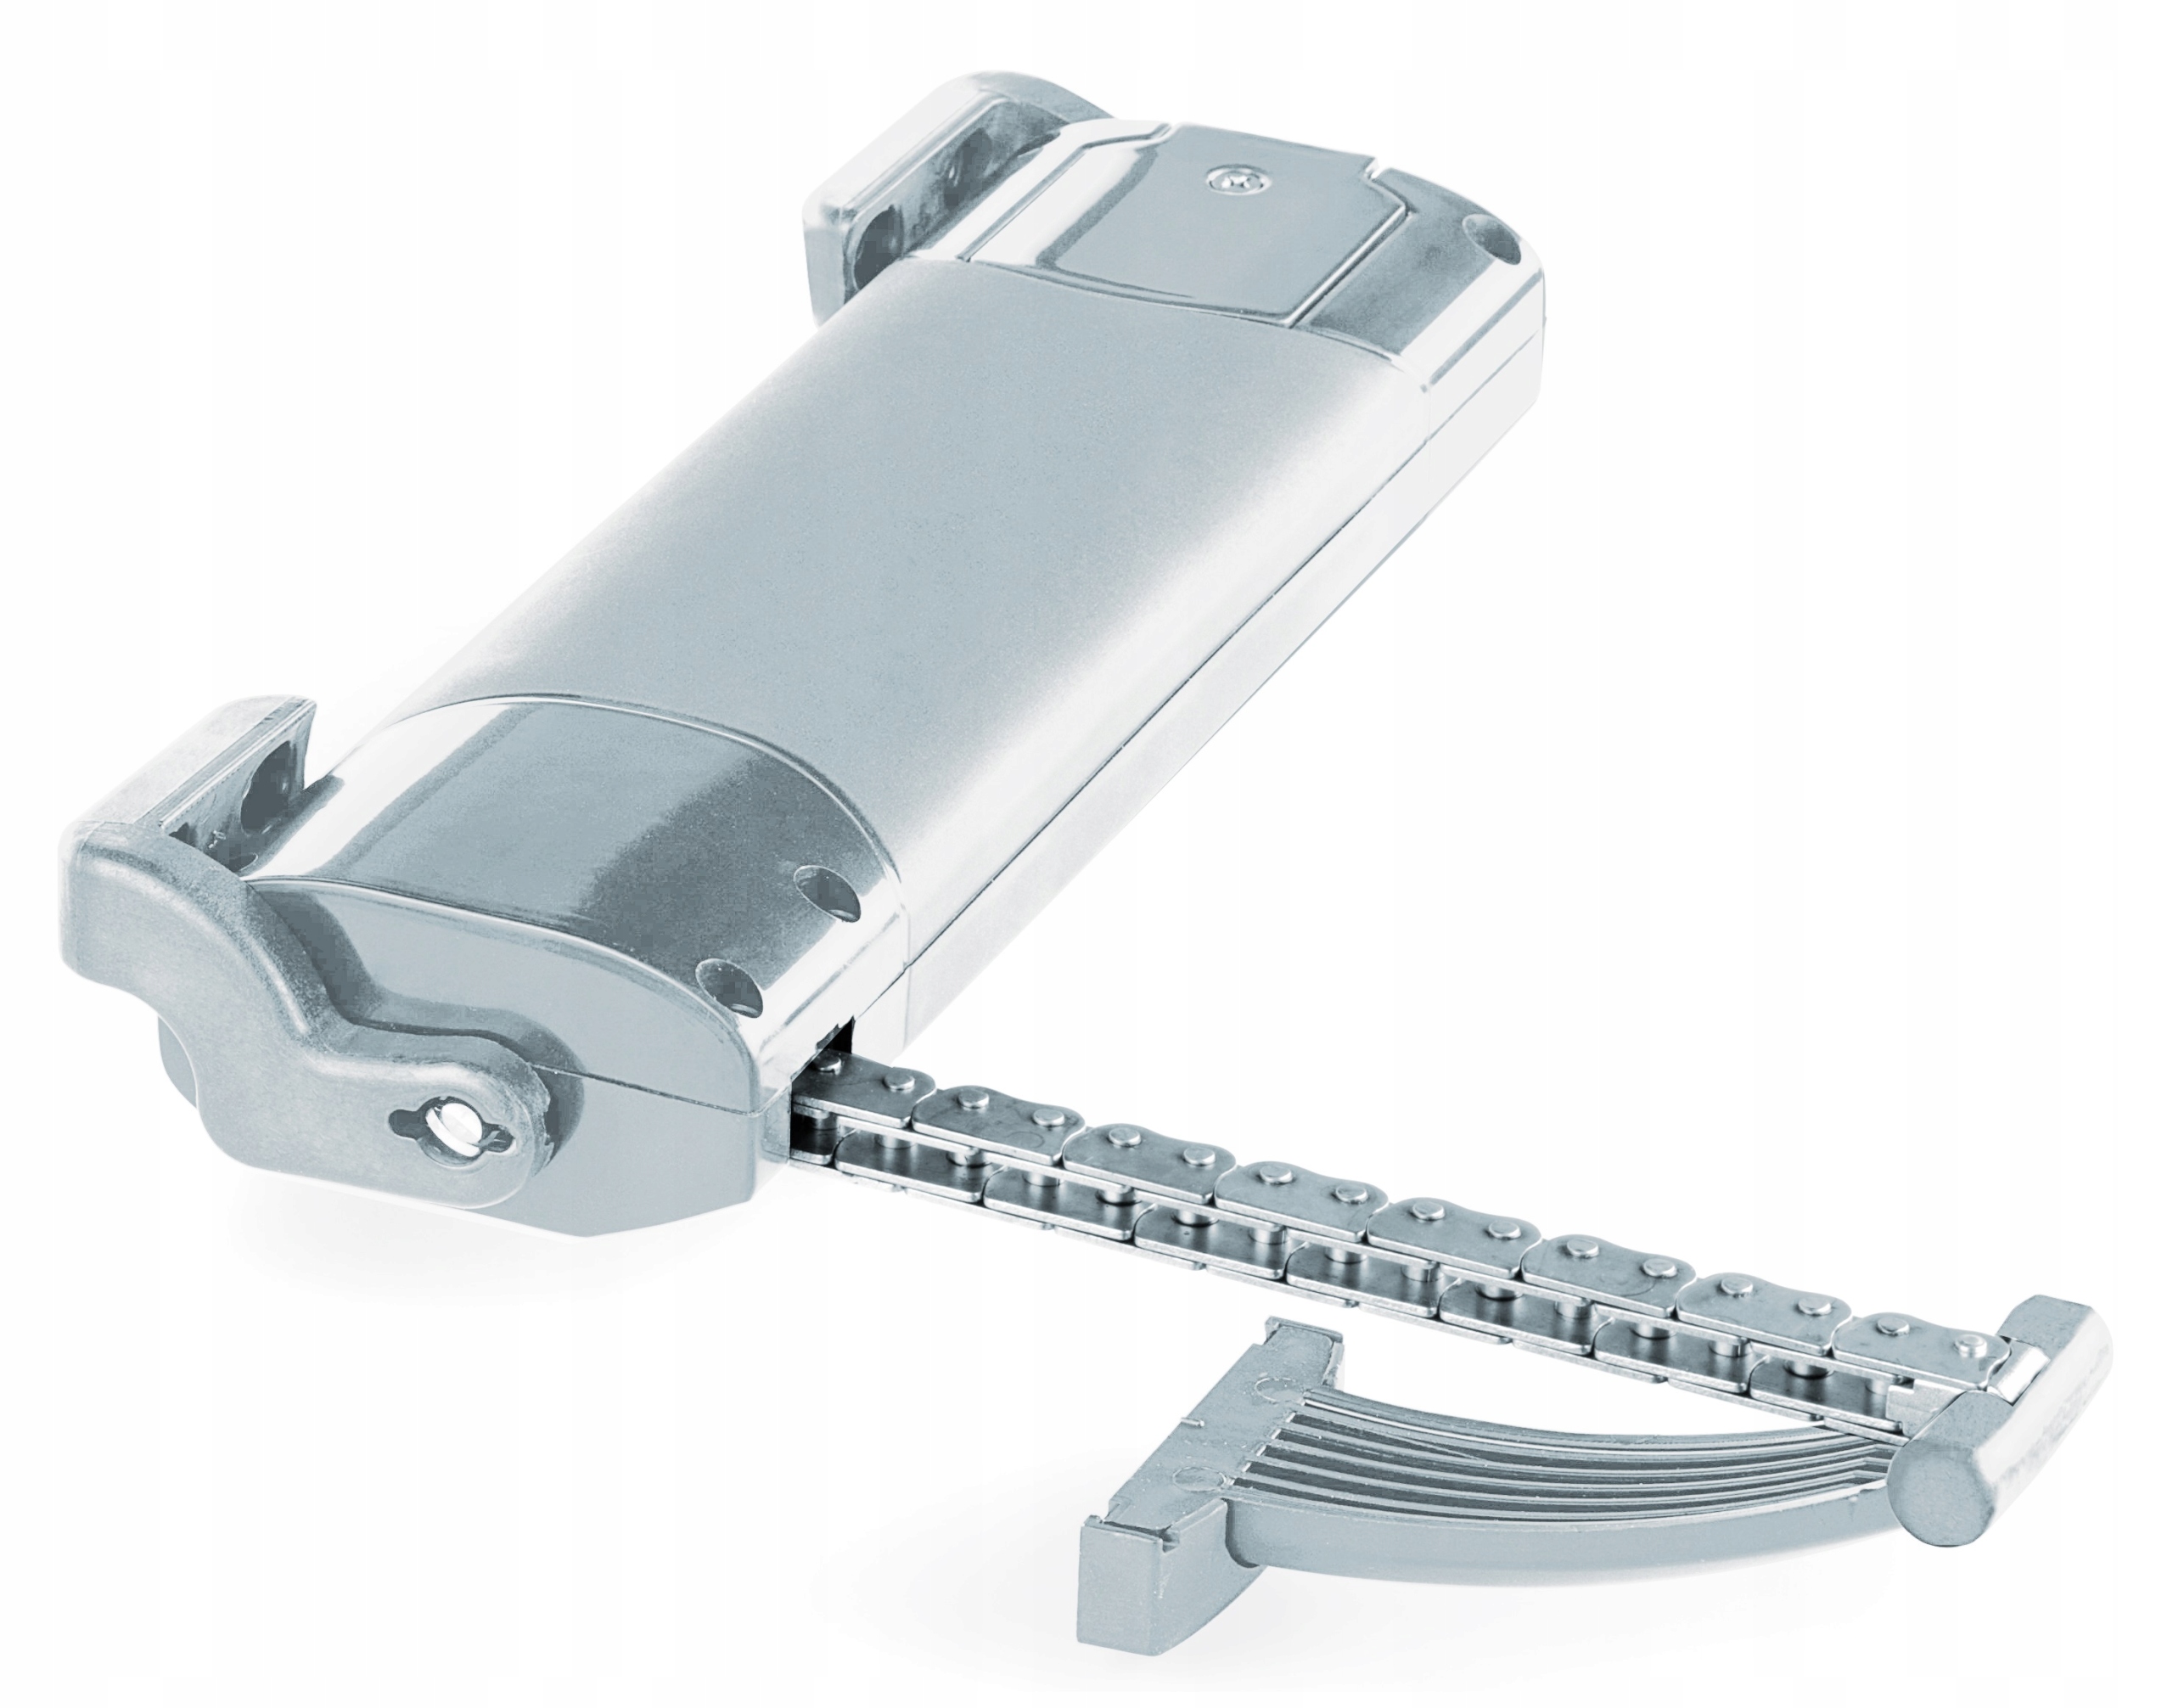 Электропривод окон купить. Comunello Smart Twin 230v. GTI Chain actuator. Locking device (Latch) for md21 frame according to the Standard of the Manufacturer Comunello (ITA).